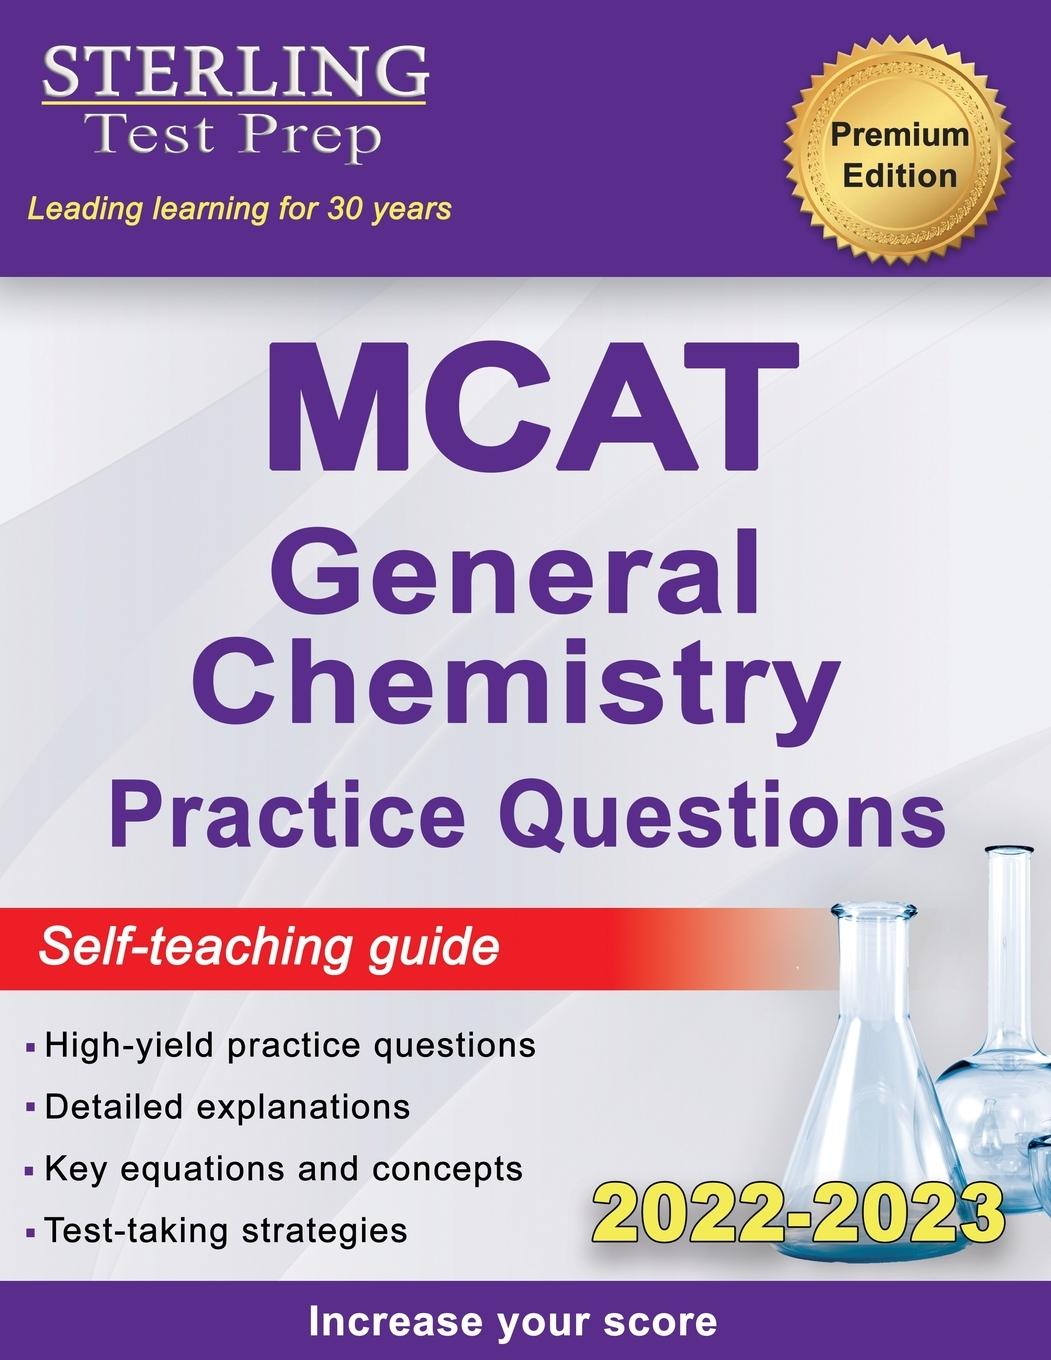 Book Sterling Test Prep MCAT General Chemistry Practice Questions 